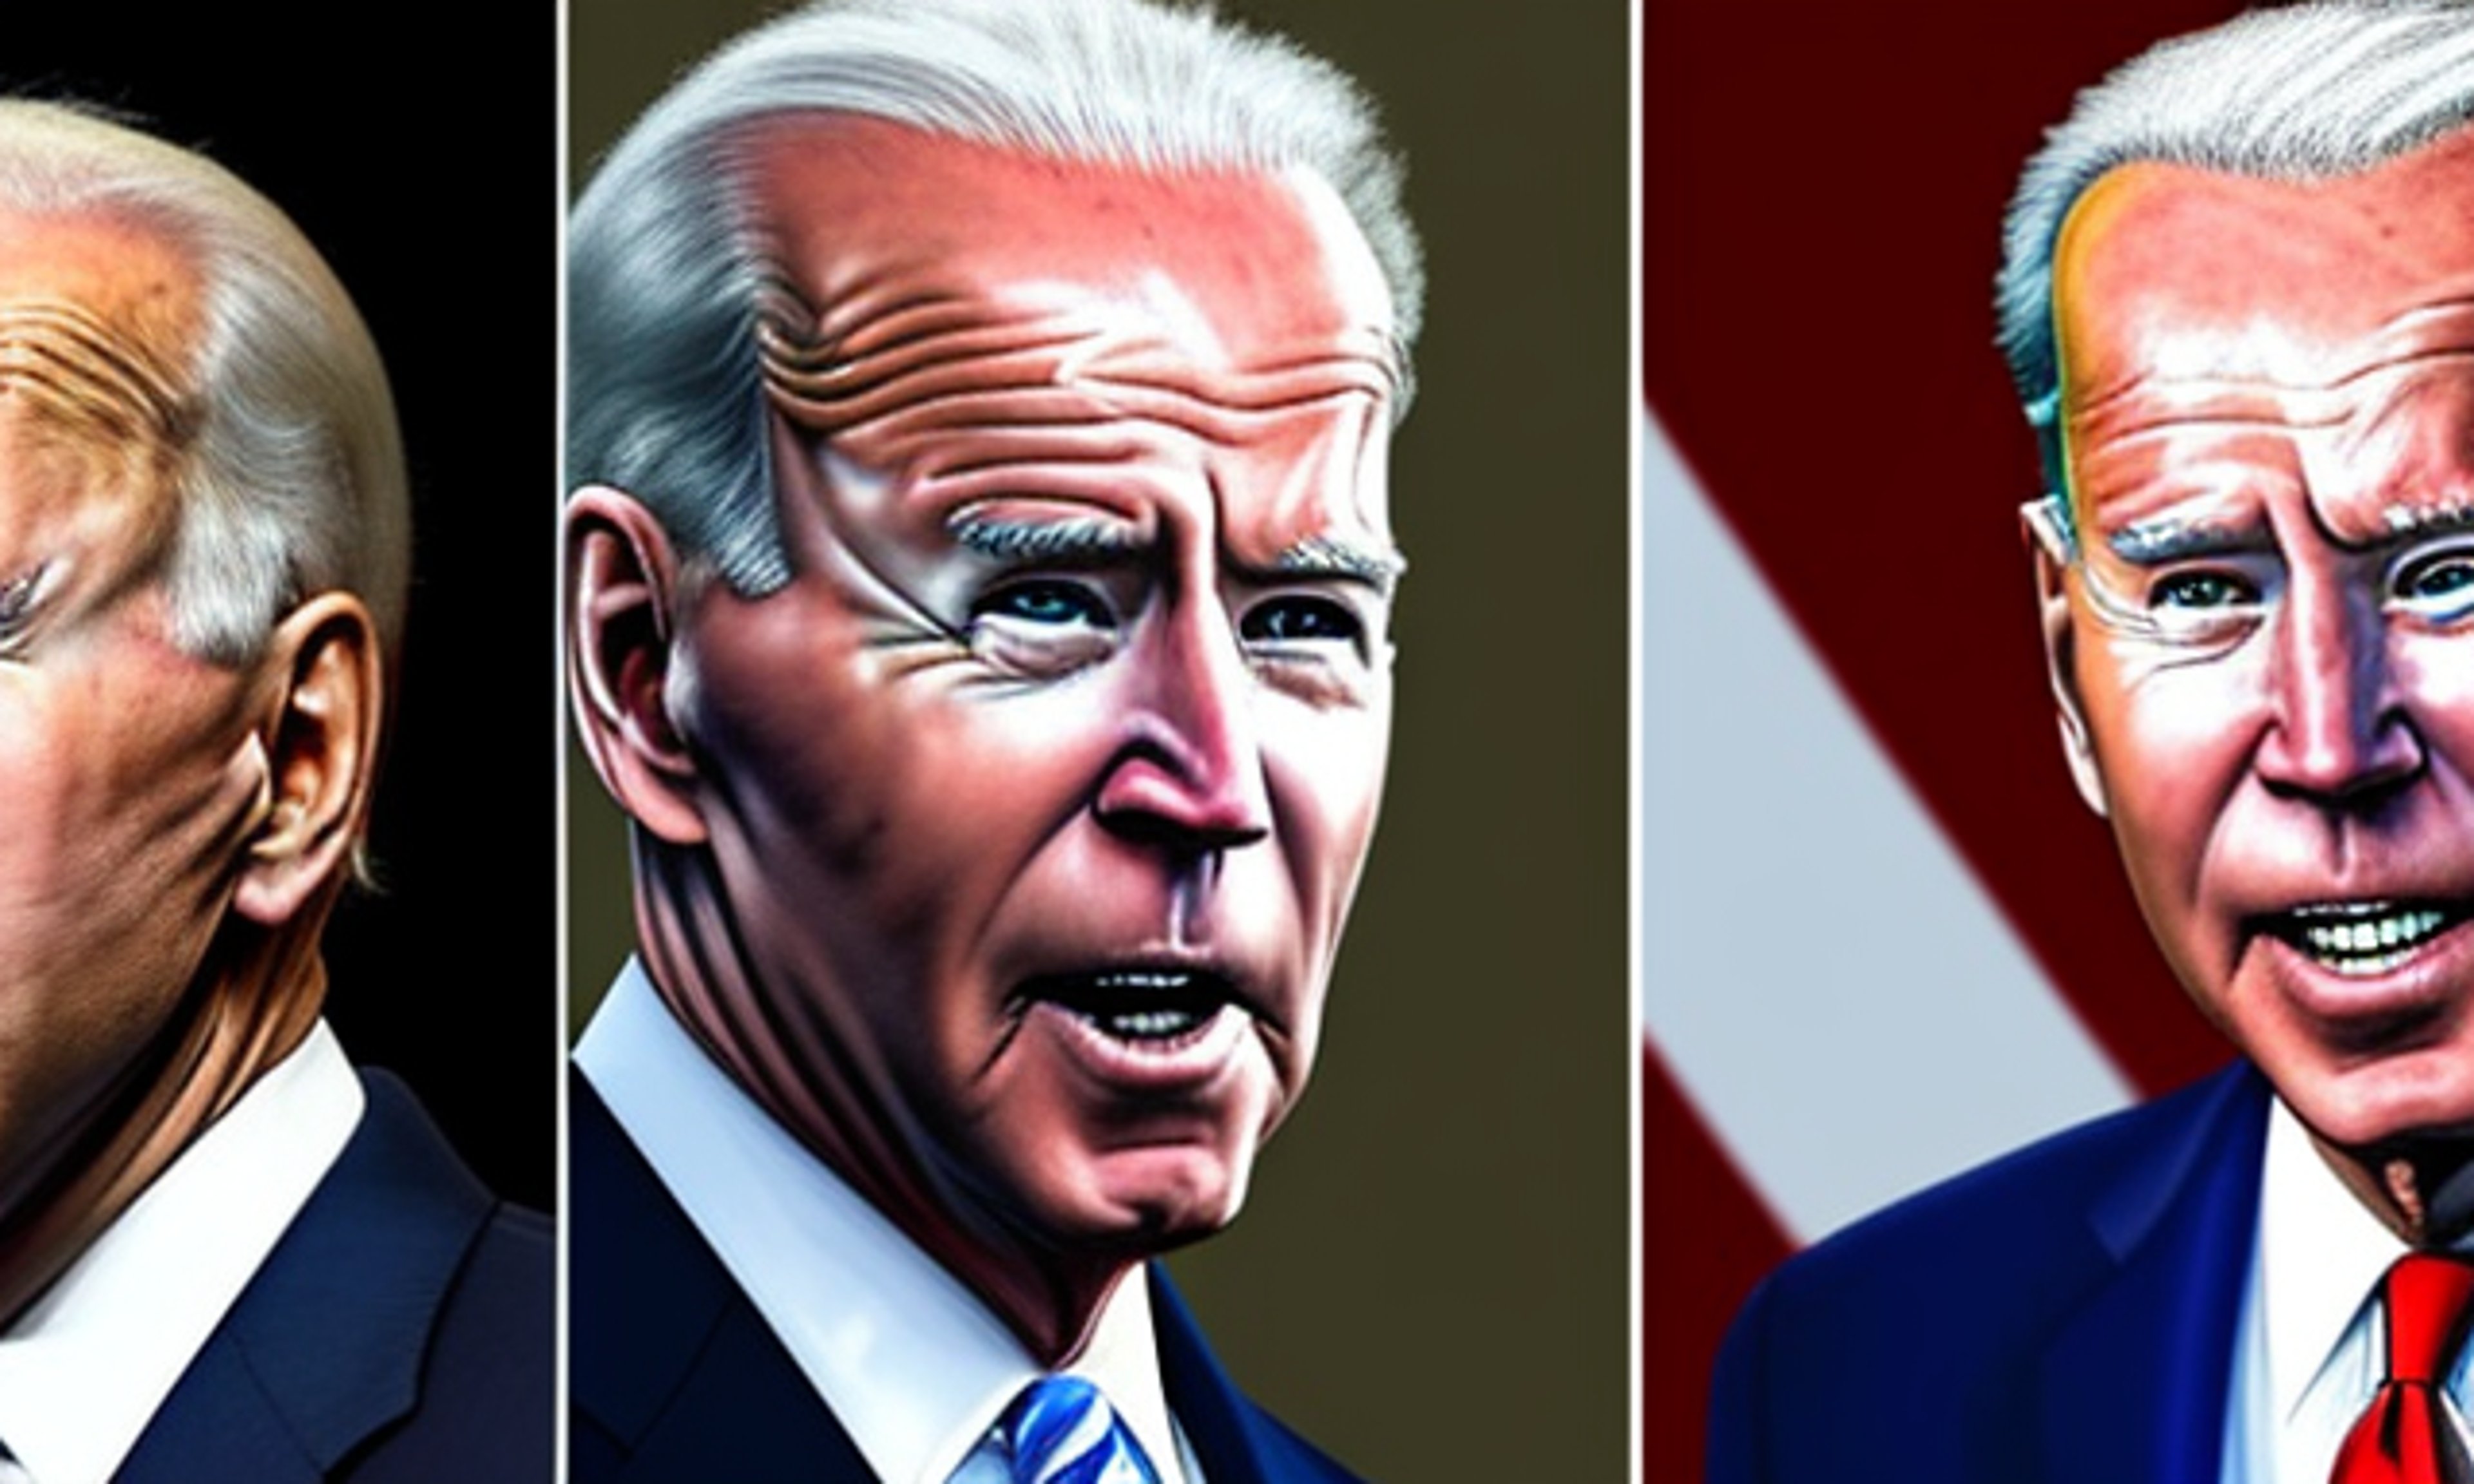 President Joe Biden Addresses Age Concerns and Discusses Reelection Prospects on MSNBC's "11th Hour"